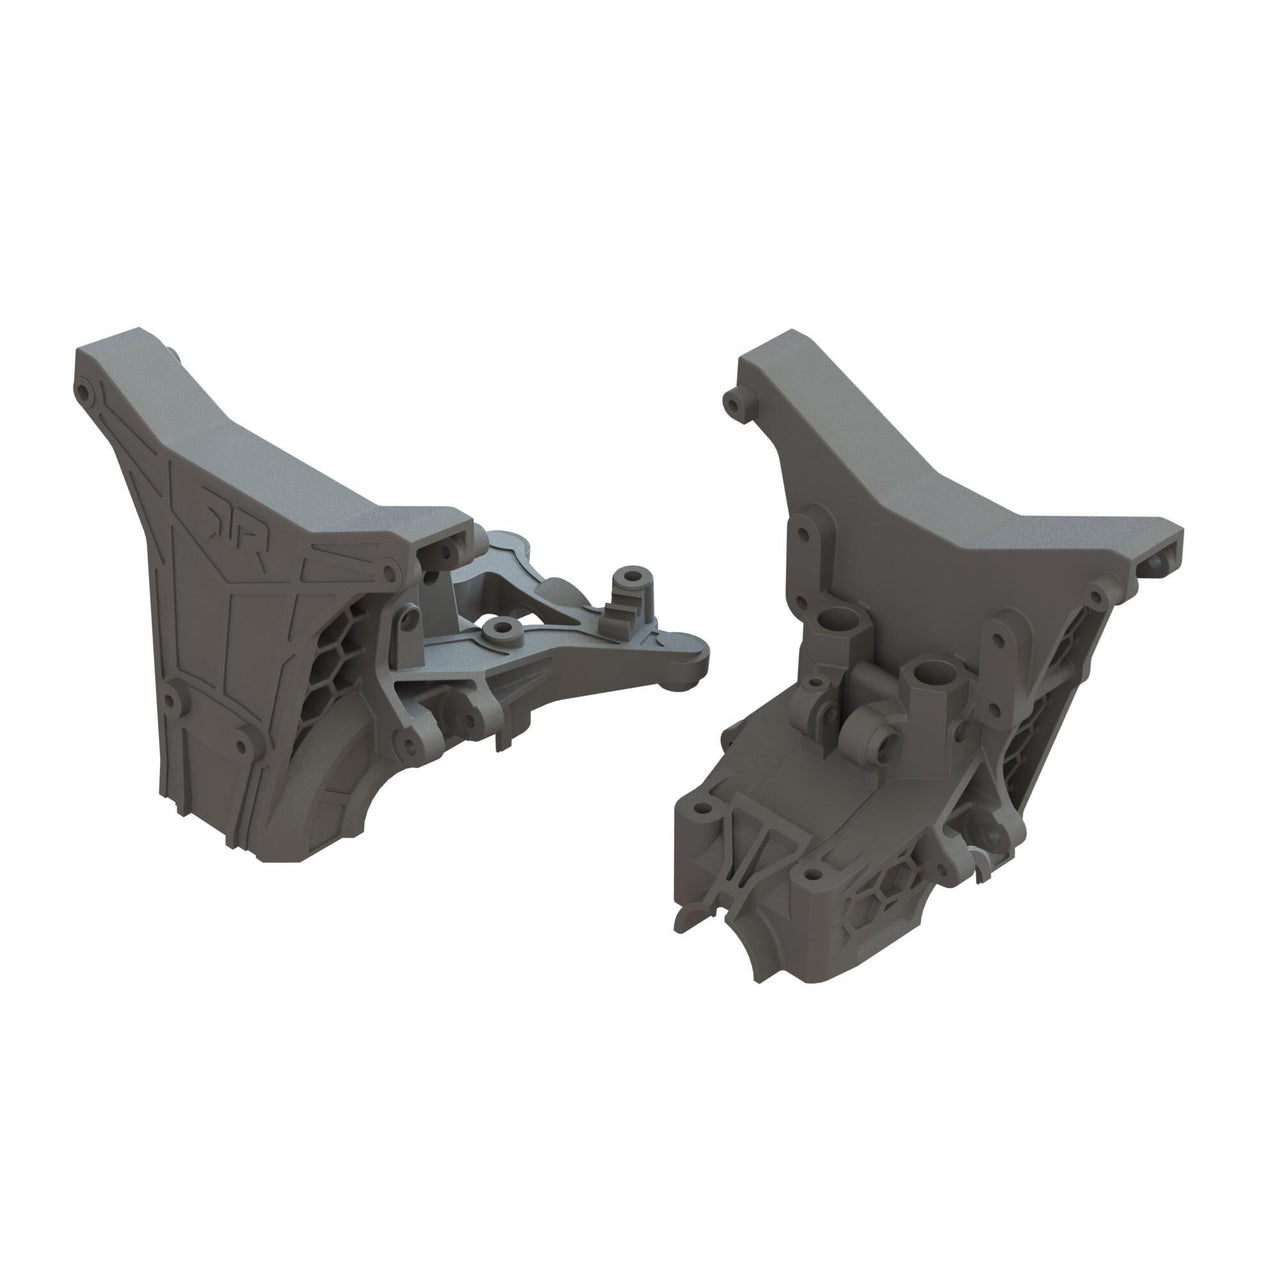 F/R Composite Upper Gearbox Covers/Shock Tower ARA320633